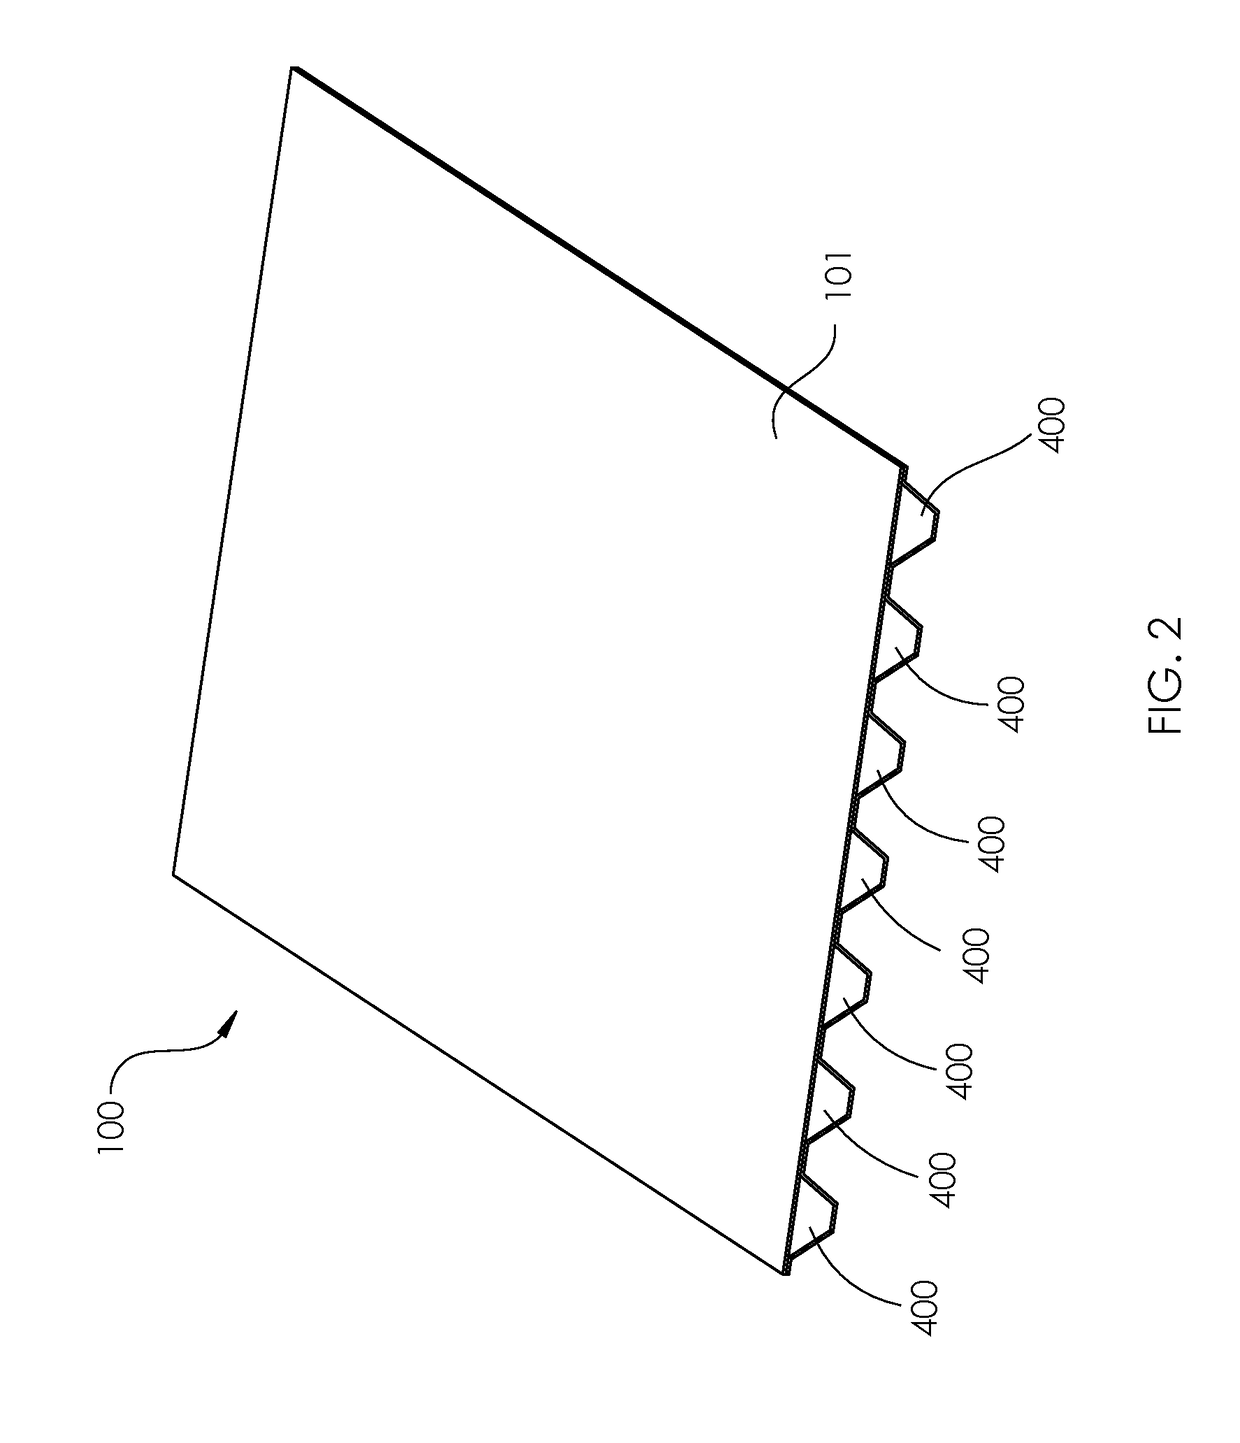 Composite structural panel and method of fabrication